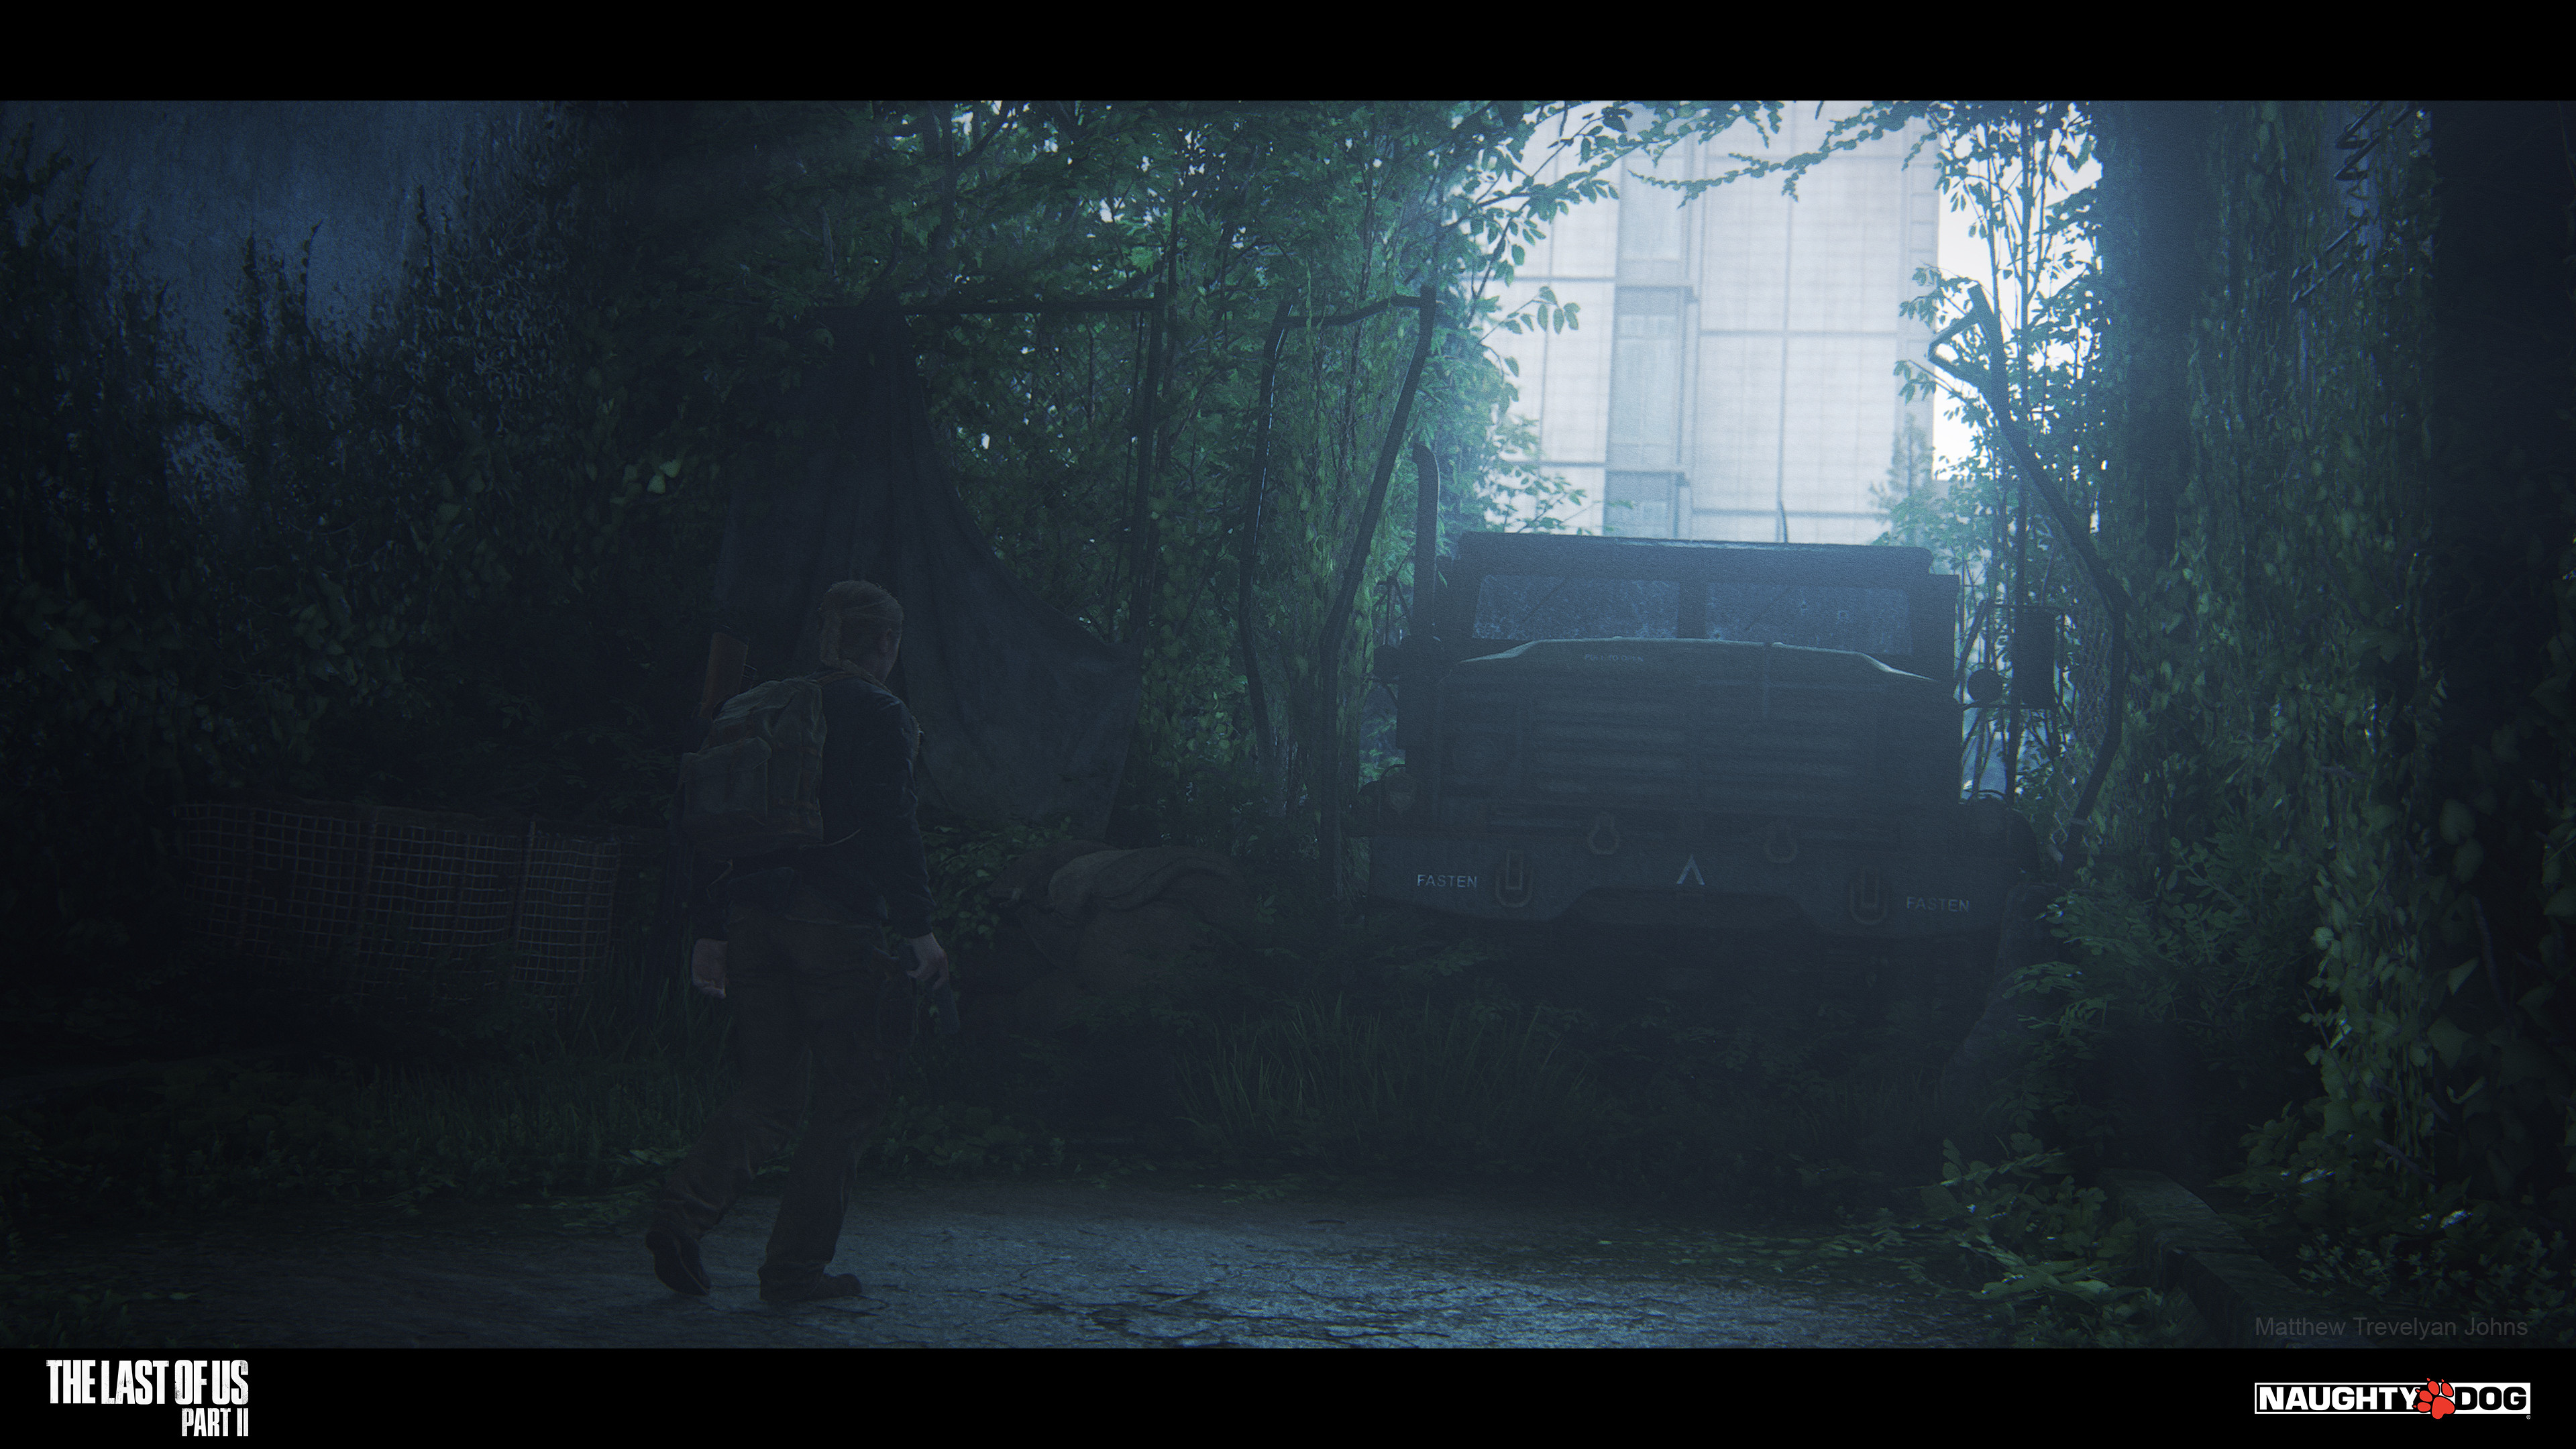 This is my final shot from The Last of Us: Part II...as Abby's ordeal in the hospital comes to an end, so does my creating these galleries. Thank you for all the support along the way. Like Abby, it's time for me to breath a little fresh air once more